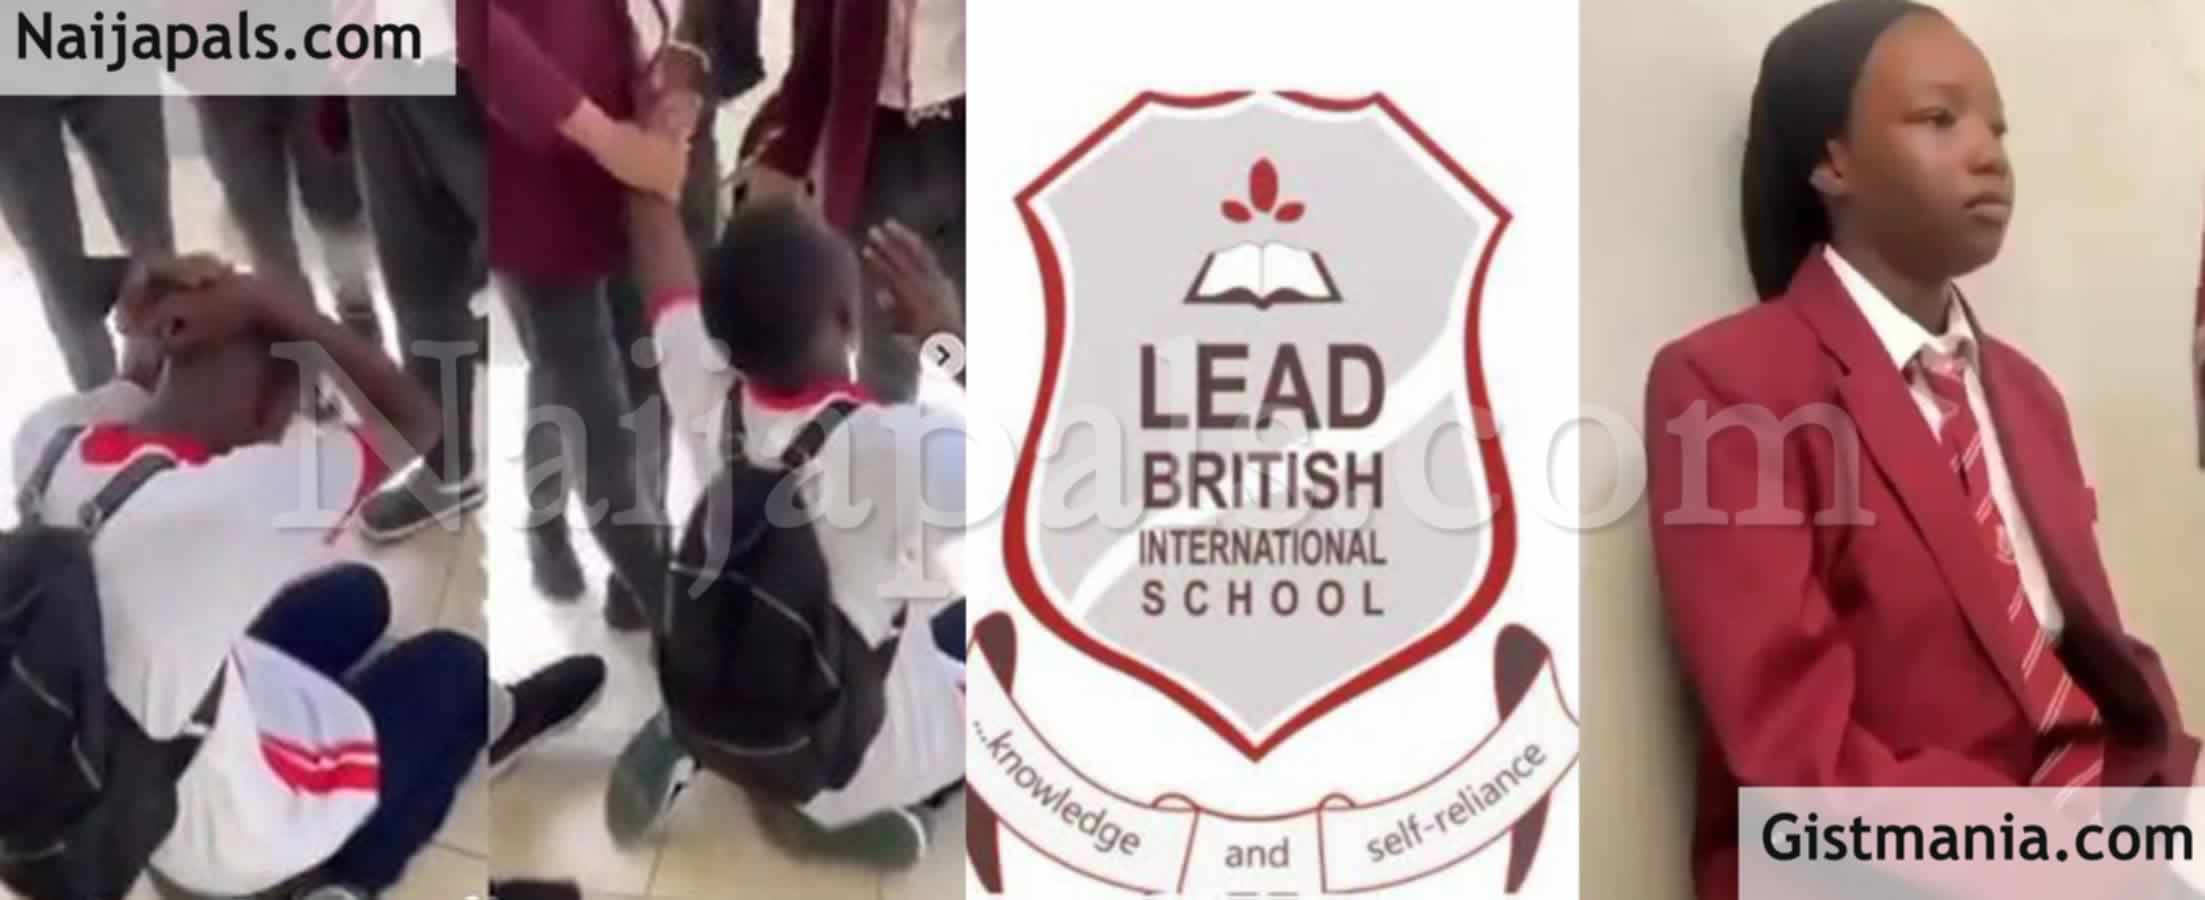 Another Sad Video Of a Male Student Being Bullied At The Same Lead British School in Abuja